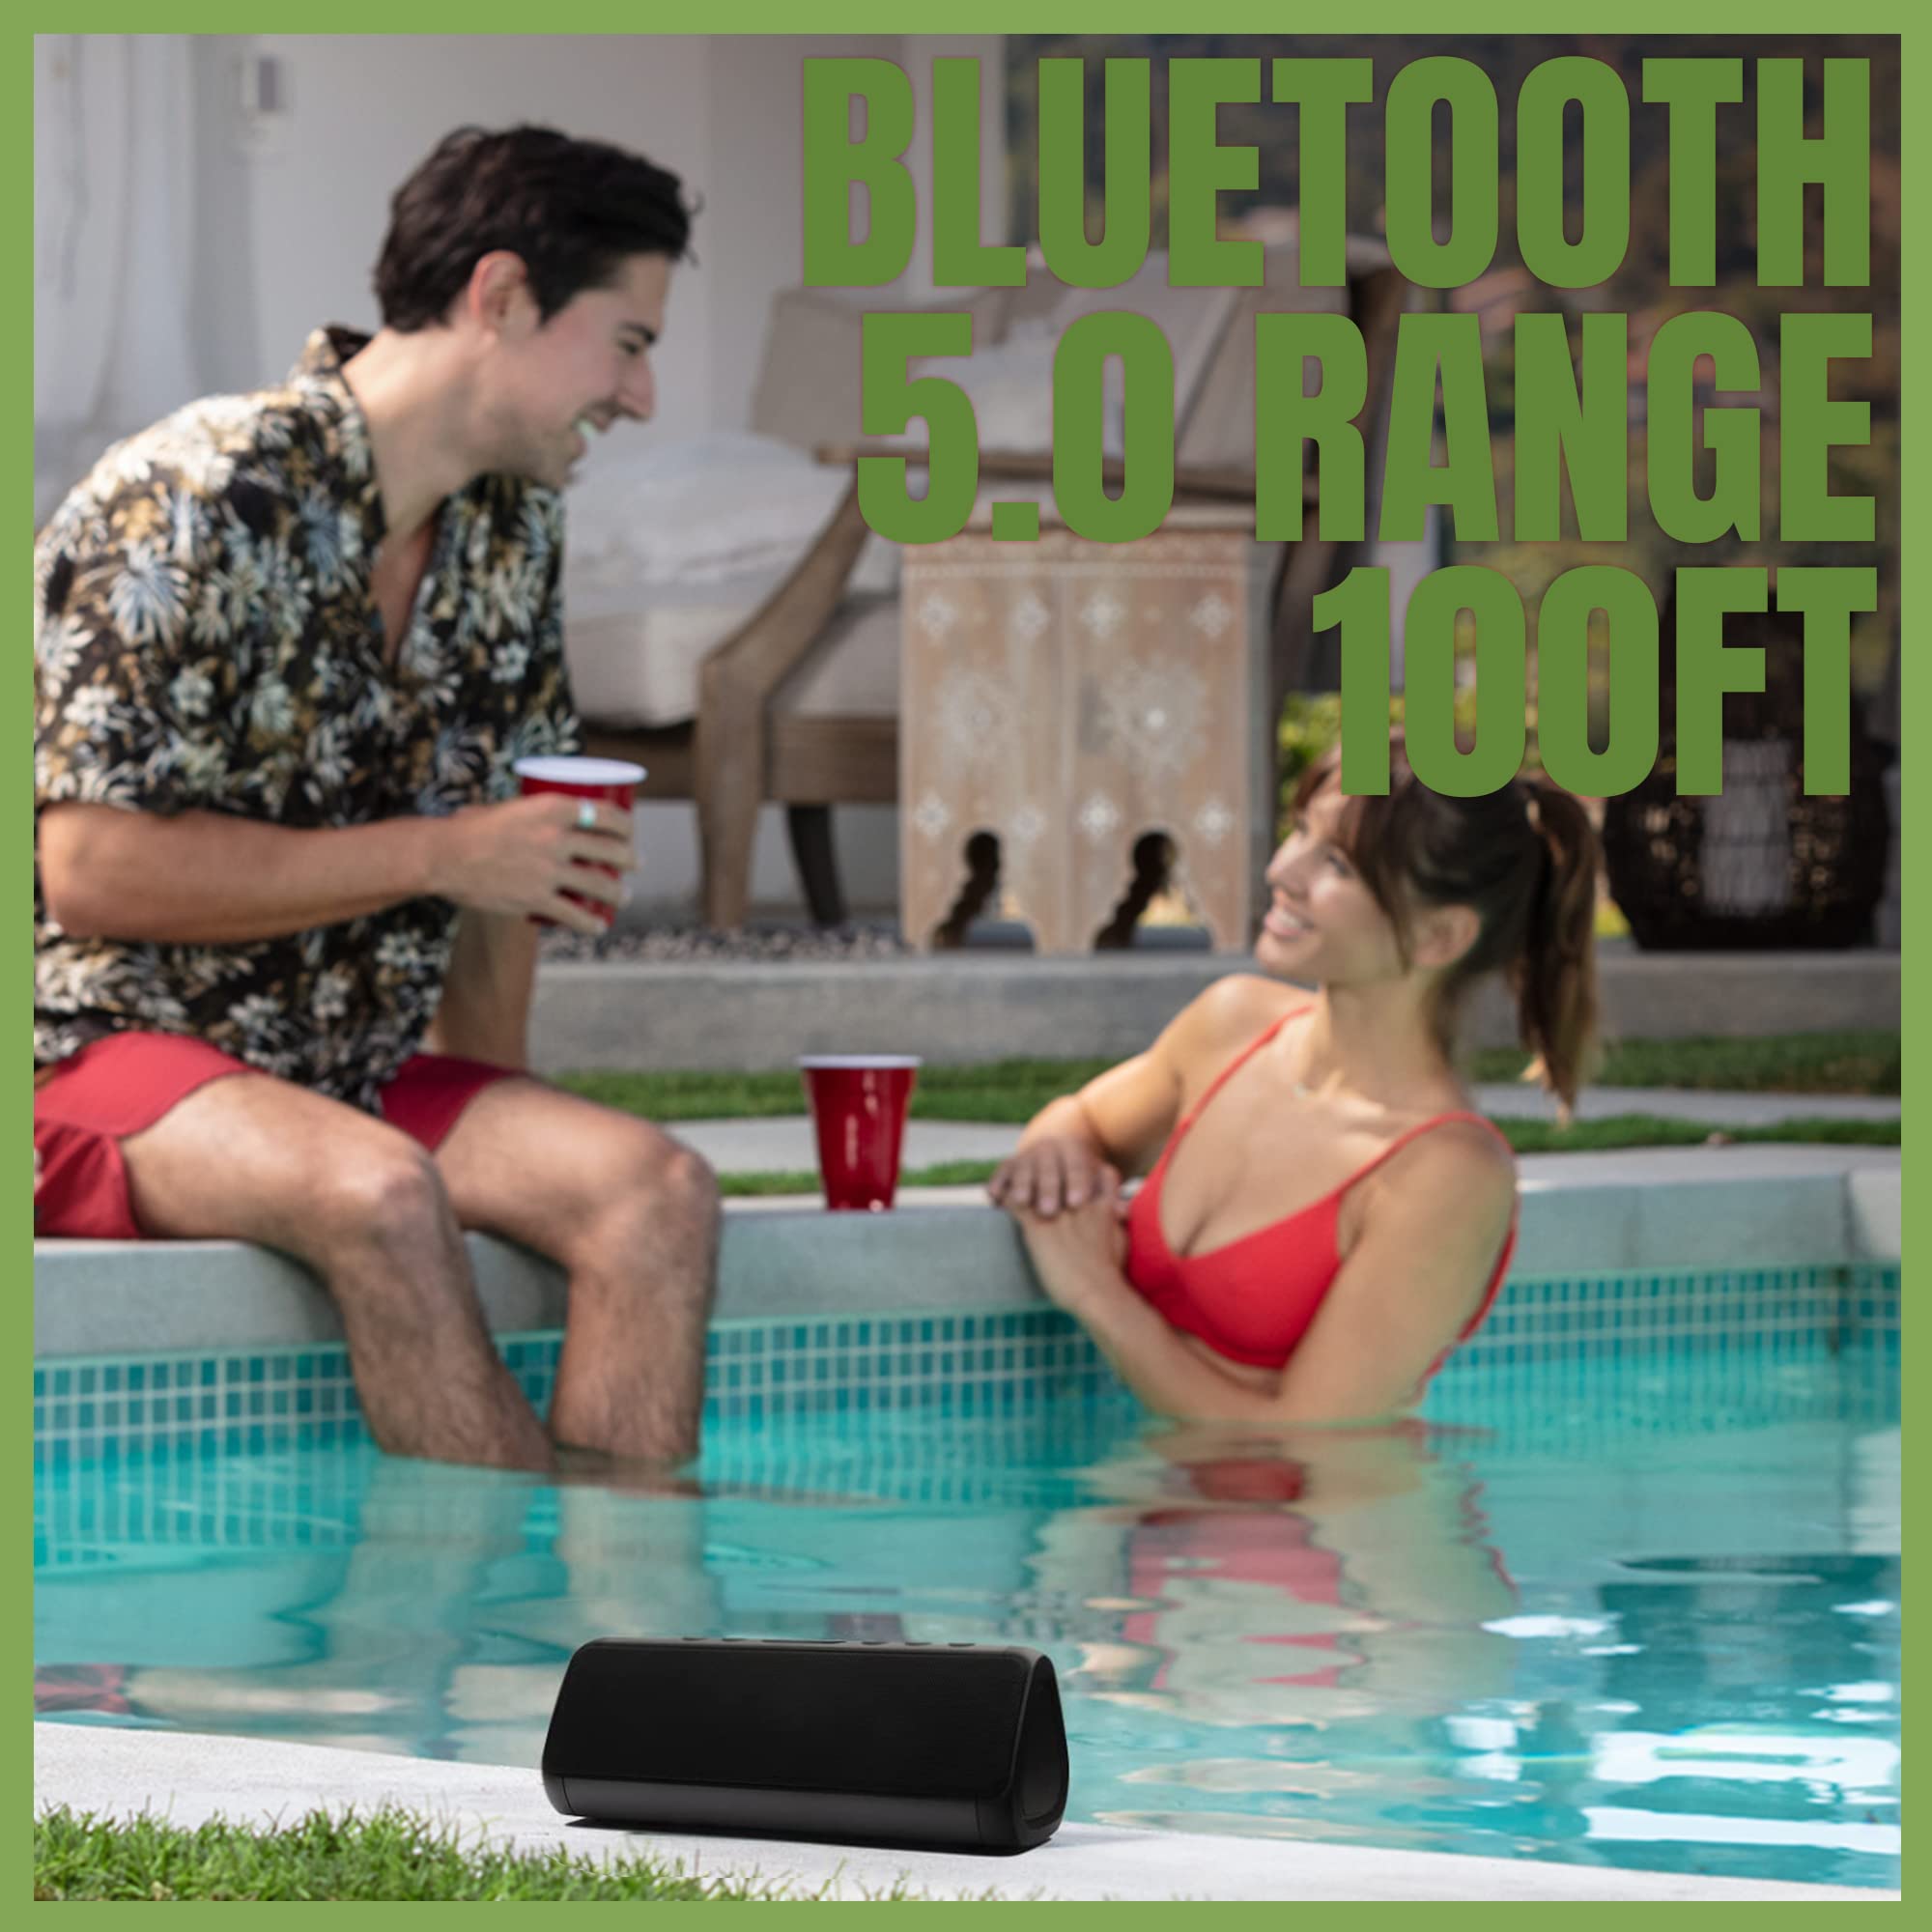 OontZ Pro Bluetooth Speaker, Premium Portable IPX7 Waterproof Wireless Speaker, Long Battery Playtime up to 15 hrs, Rich Bass, Crystal Clear Stereo Sound with Aux Input (Black)